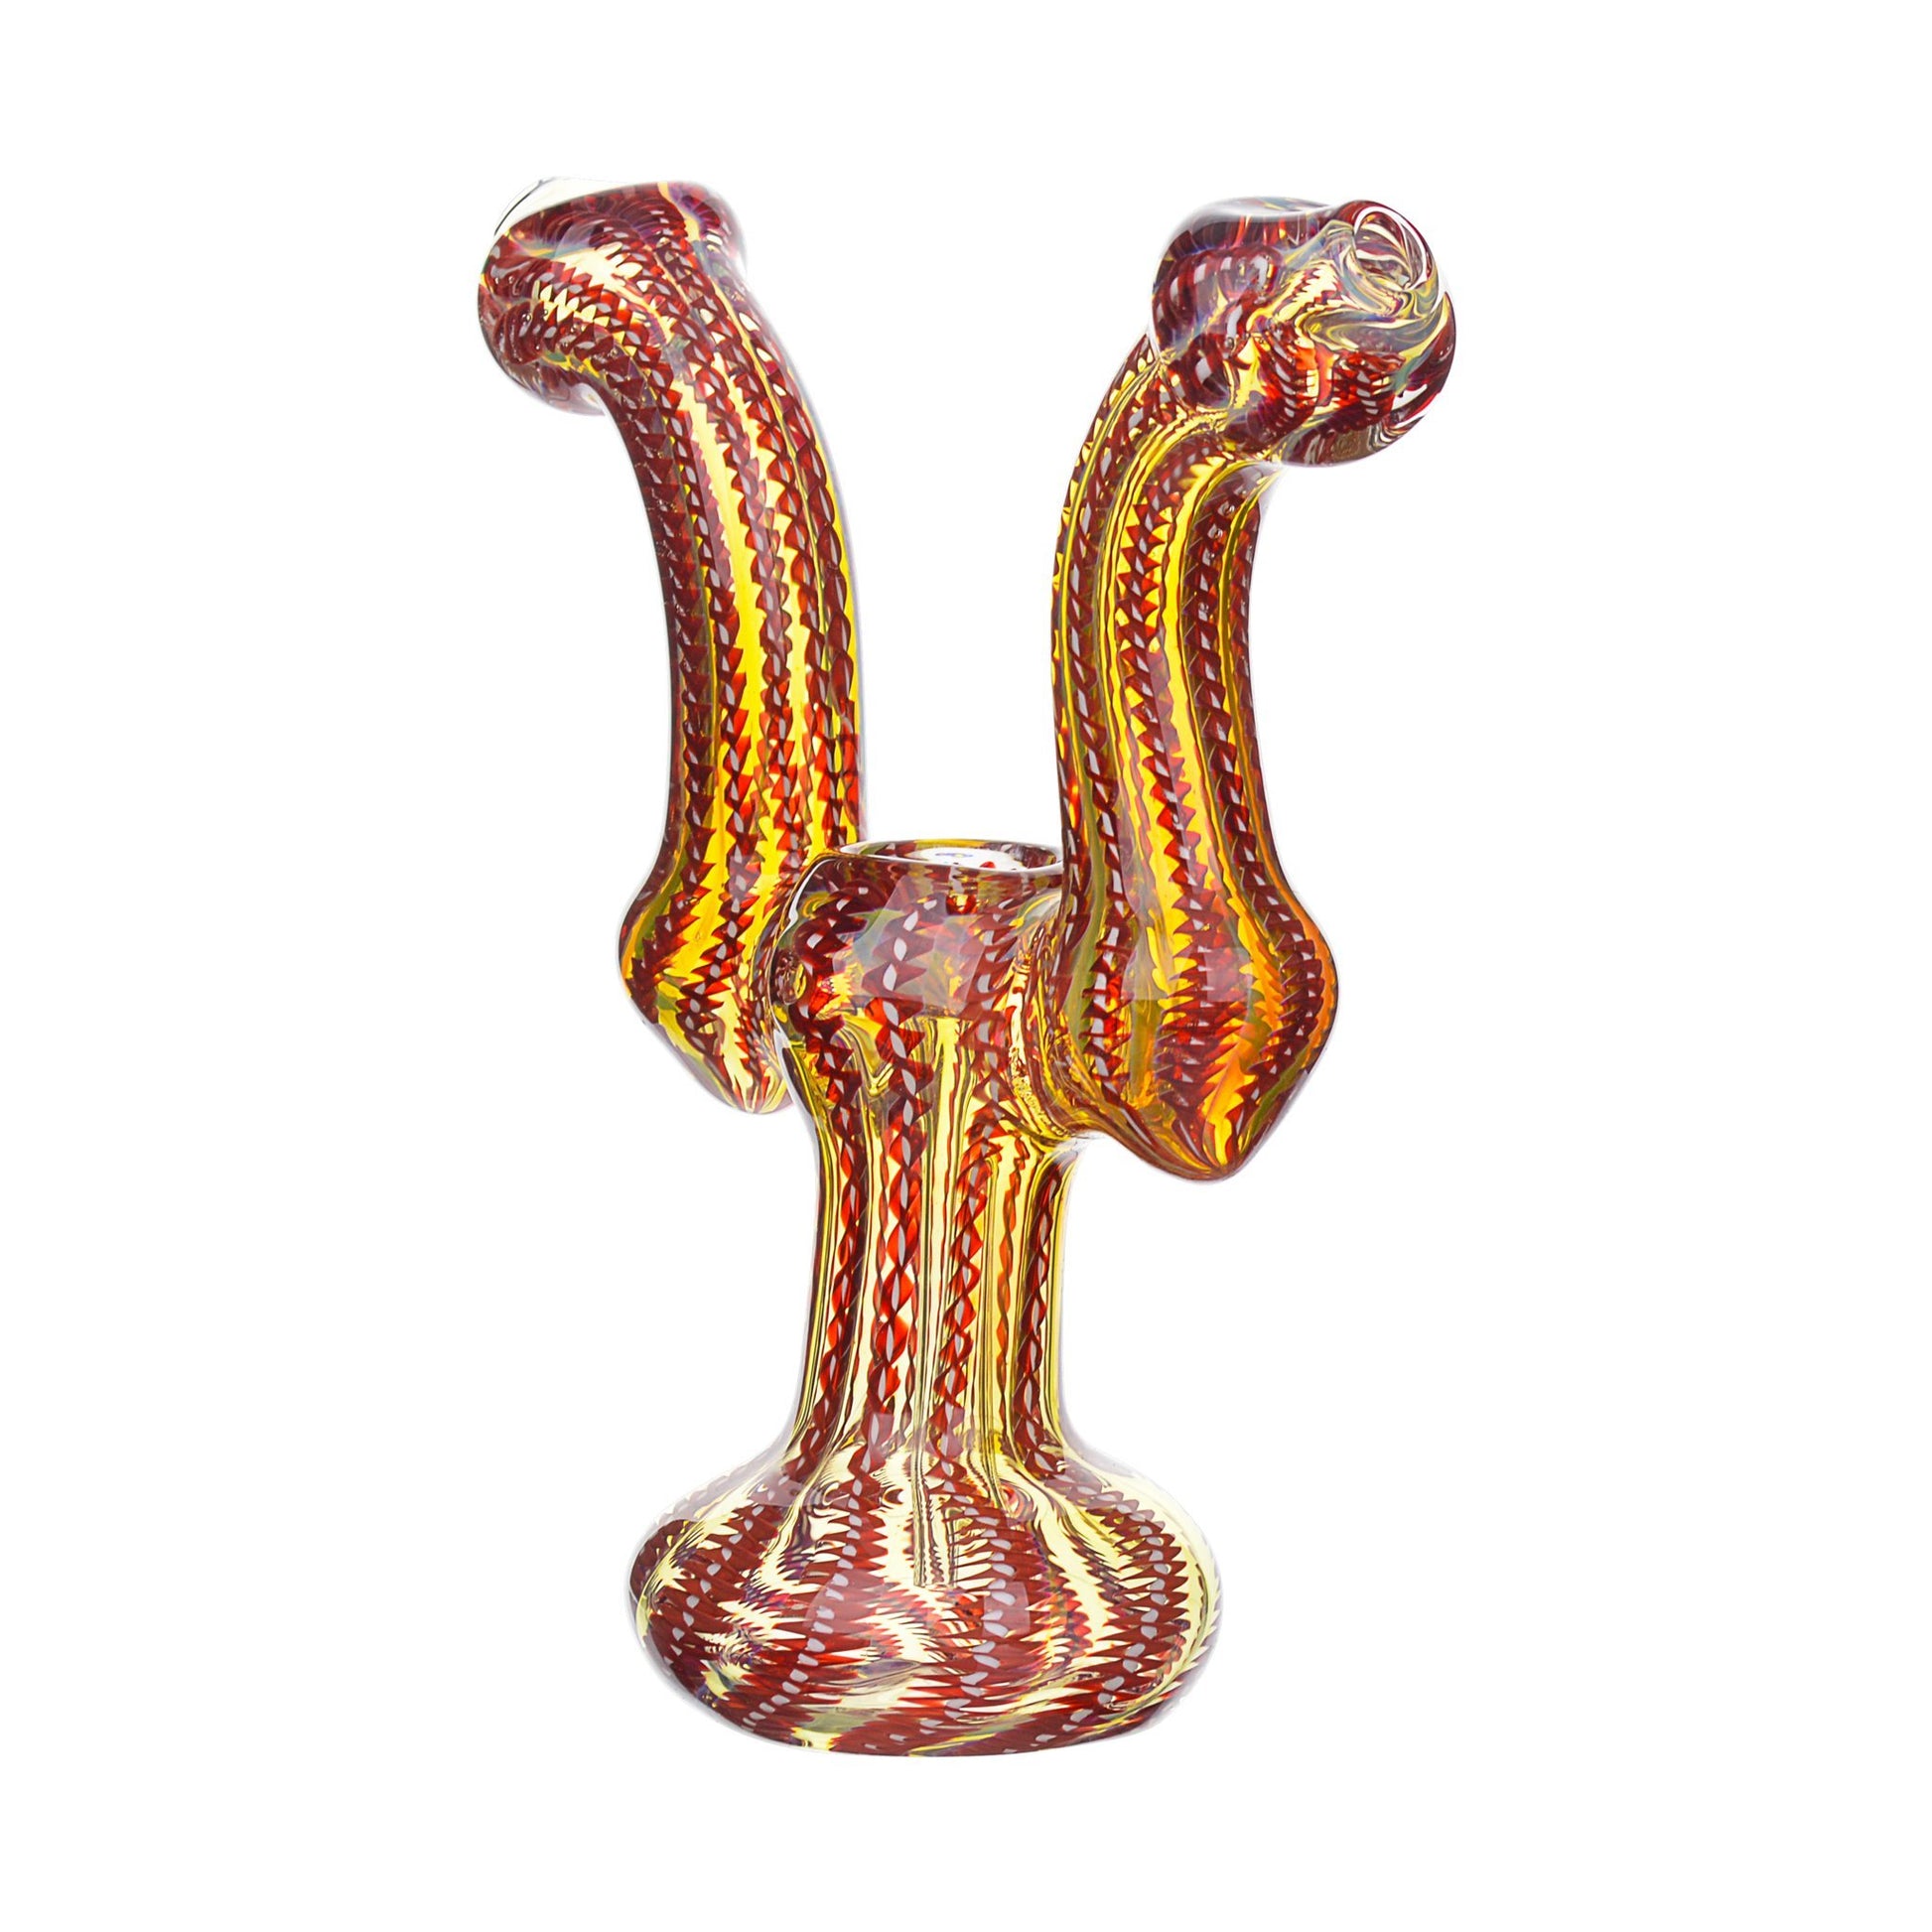 Uniquely-designed glass bubbler smoking device 2 mouthpiece ethnic pattern swirly colors with Sherlock S stems